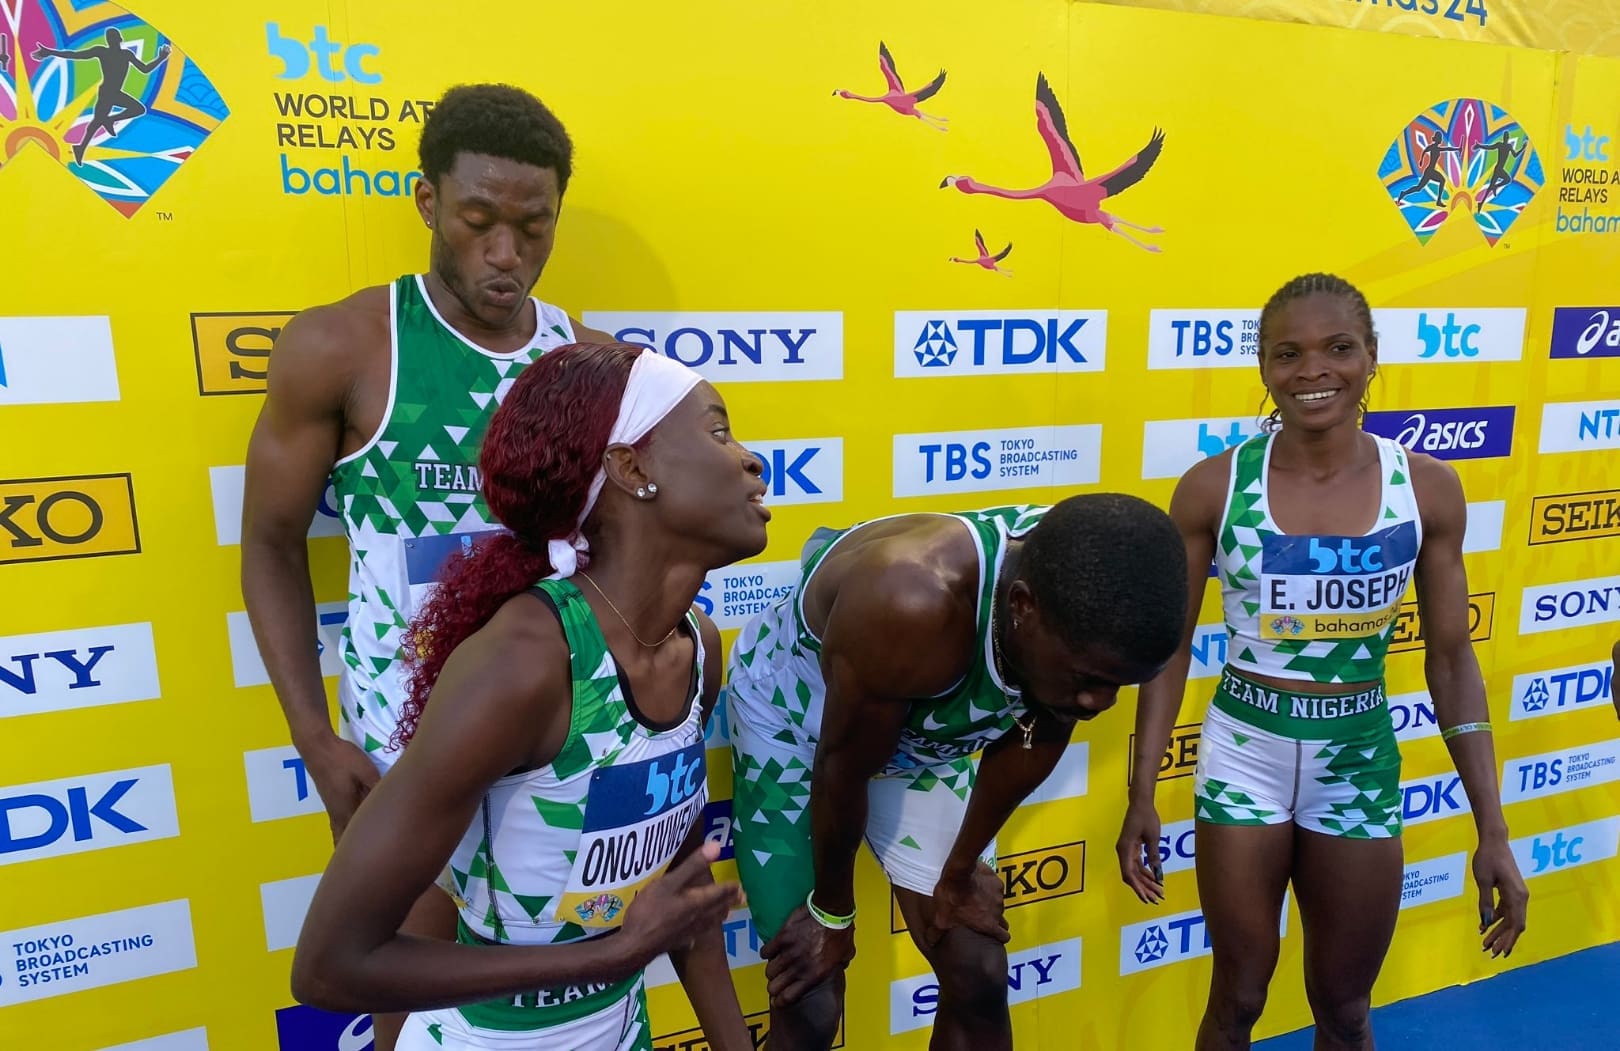 World Relays Team Nigeria Clinches Men's, Mixed 4x400m Olympic Tickets